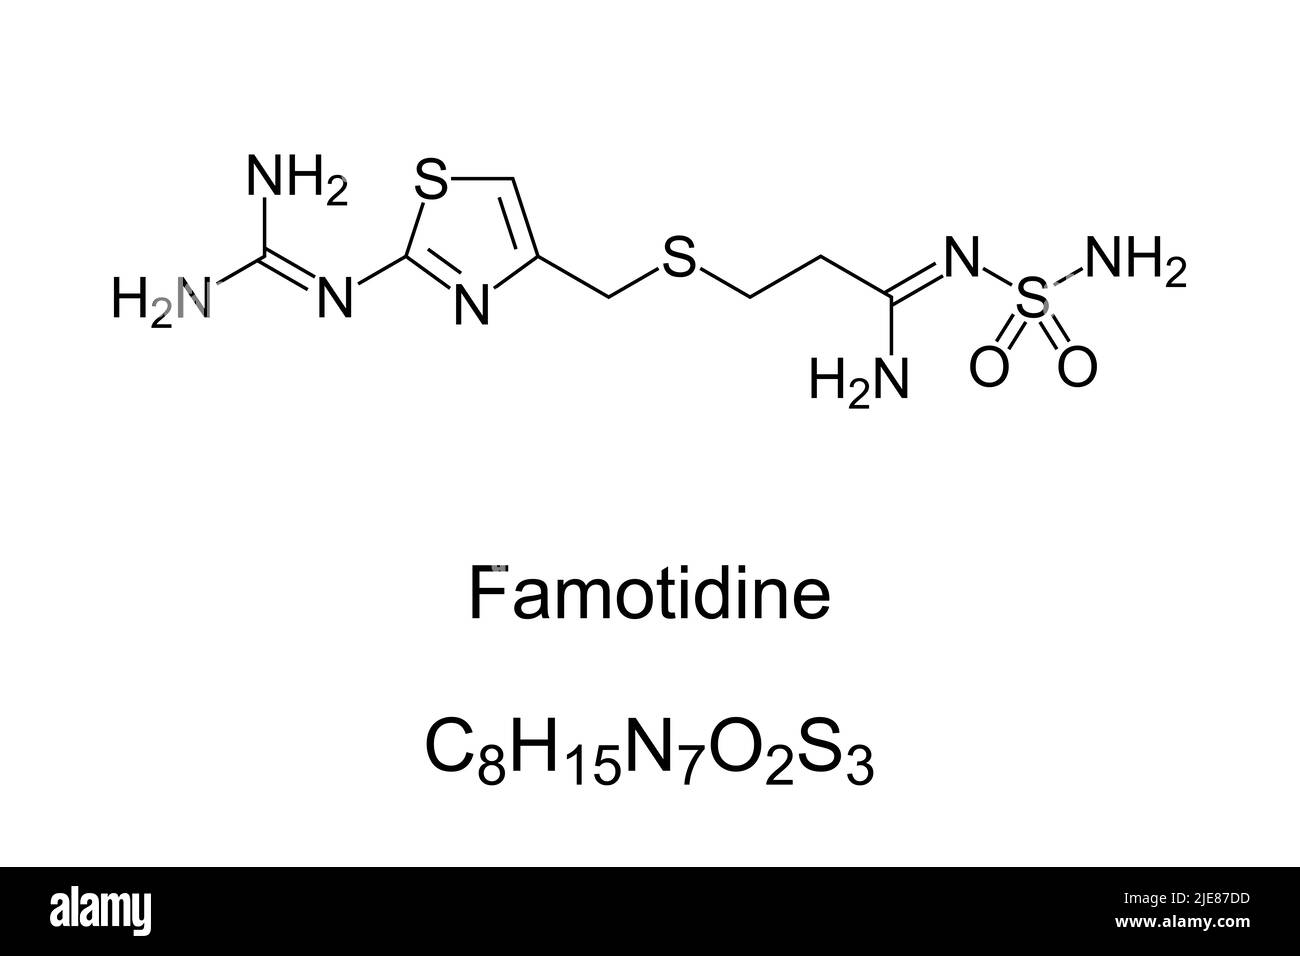 Famotidine, chemical formula. Histamine H2 receptor antagonist medication that decreases stomach acid production, used to treat peptic ulver disease. Stock Photo